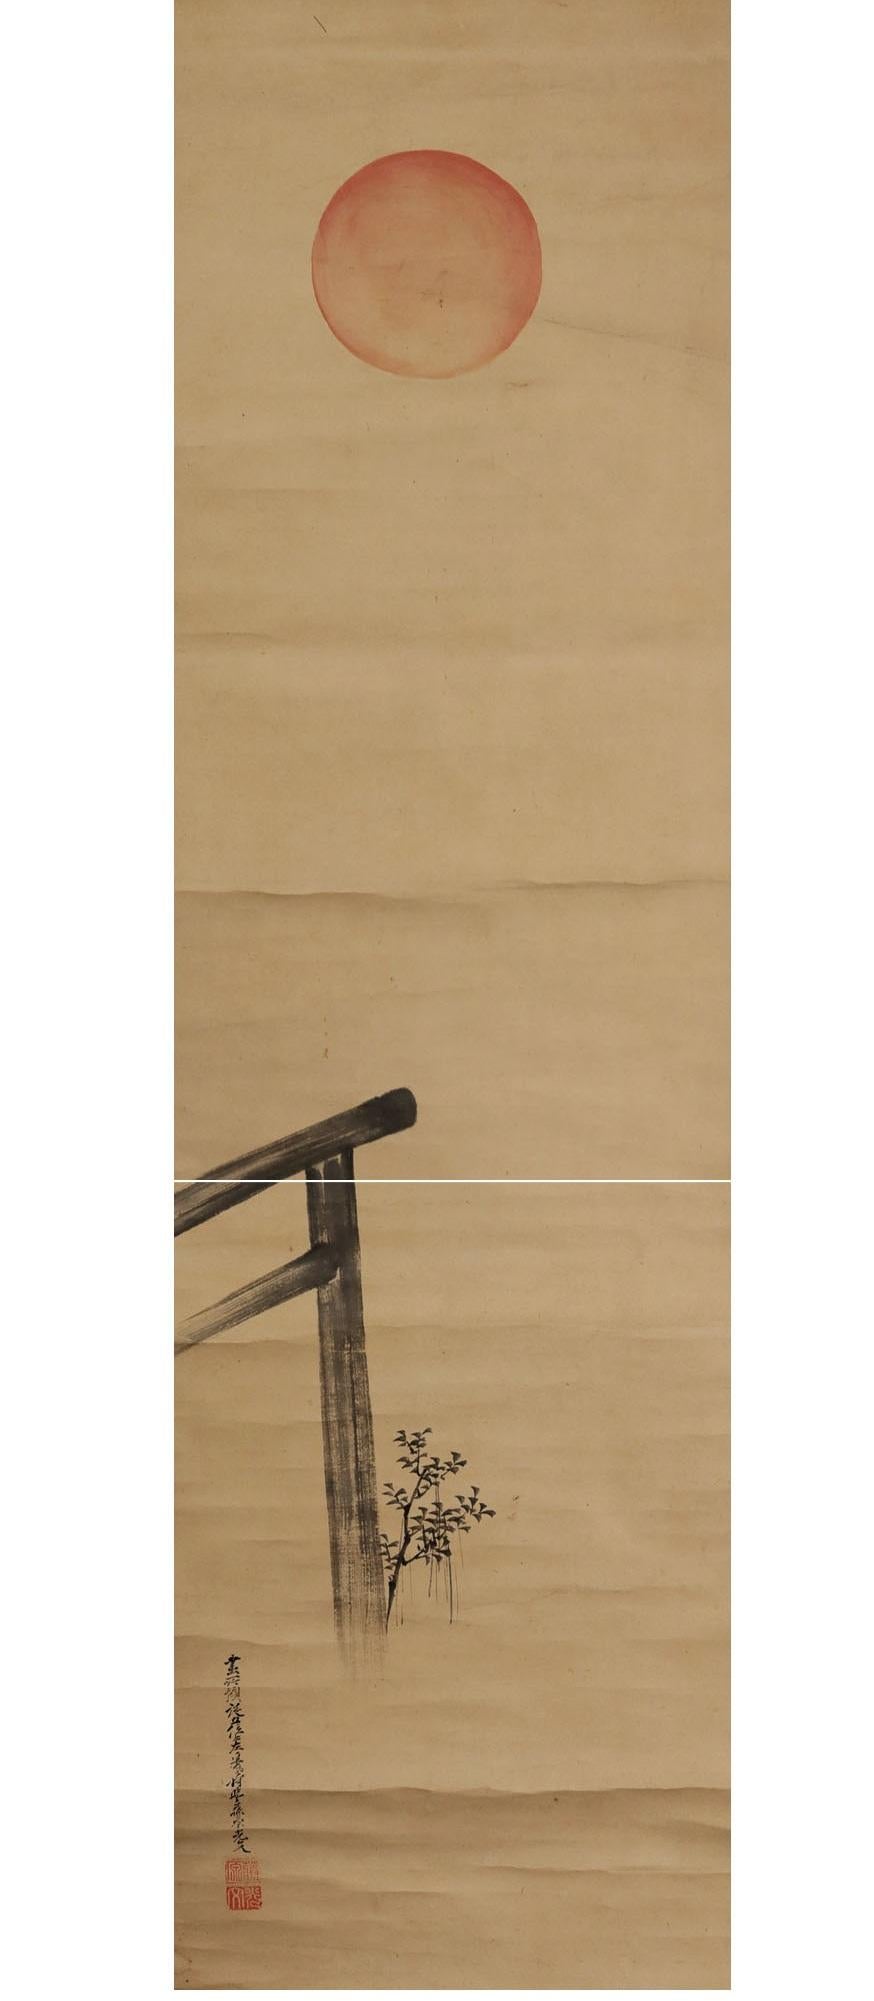 Product Description
　　The item below was hand-painted by Mitsufumi Tosa.It
　　depicts a torii gate at the rising sun, making it perfect for New Year's and auspicious occasions.

[Tosa Mitsufumi]
1812-1879 Painter from the late Edo period to the Meiji